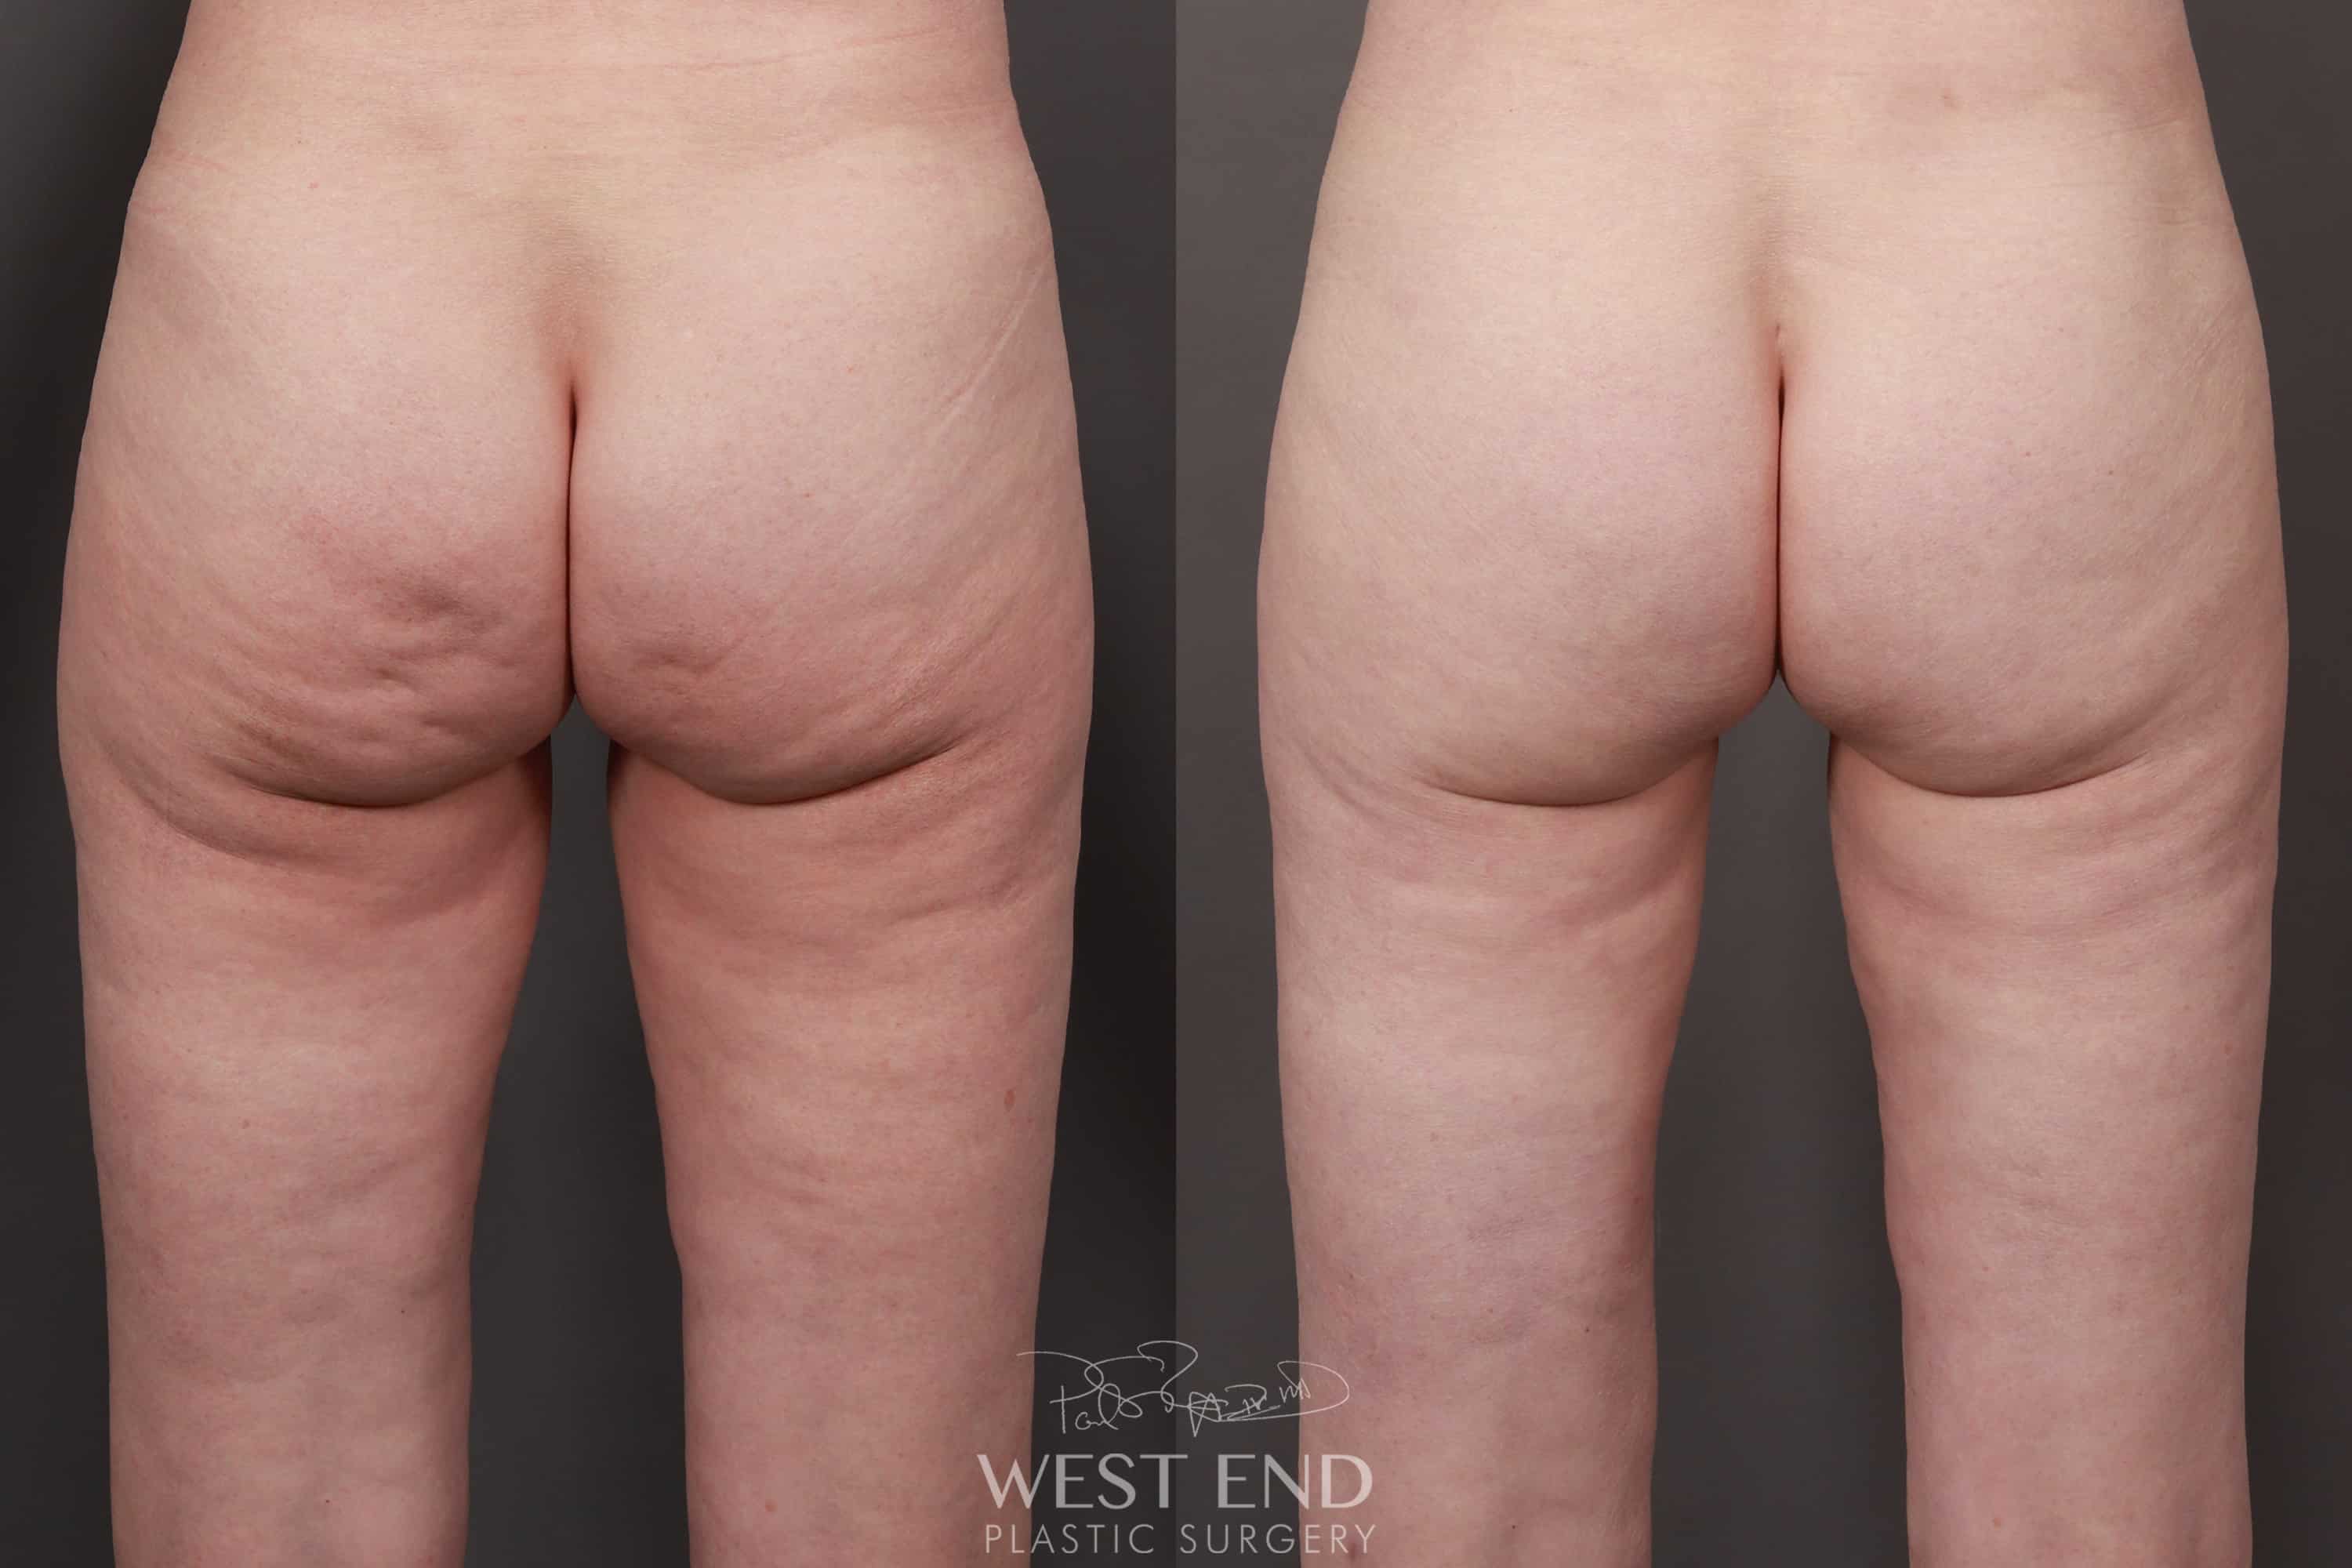 Liposuction, Renuvion, & Buttock Dimple Release with Focused Fat Grafting